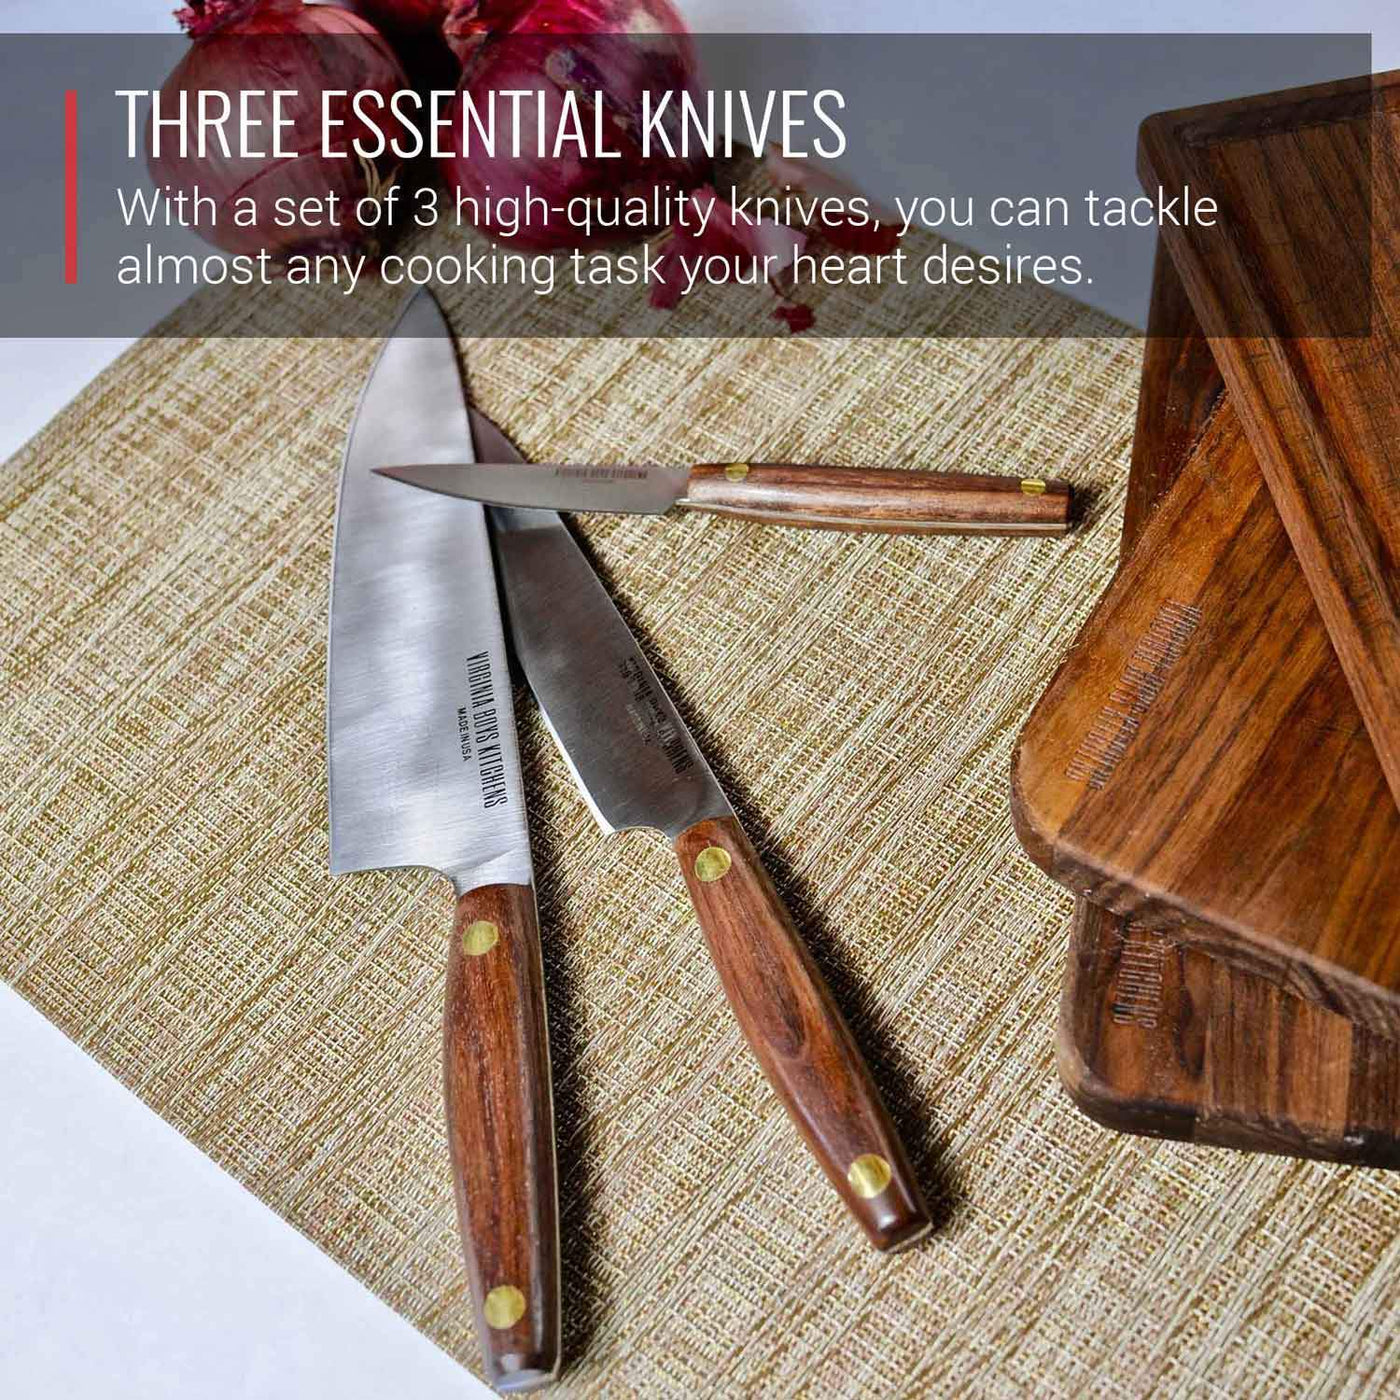 3 Piece Stainless Steel Chef Knife Set with Walnut Wood Handles by Virginia Boys Kitchens